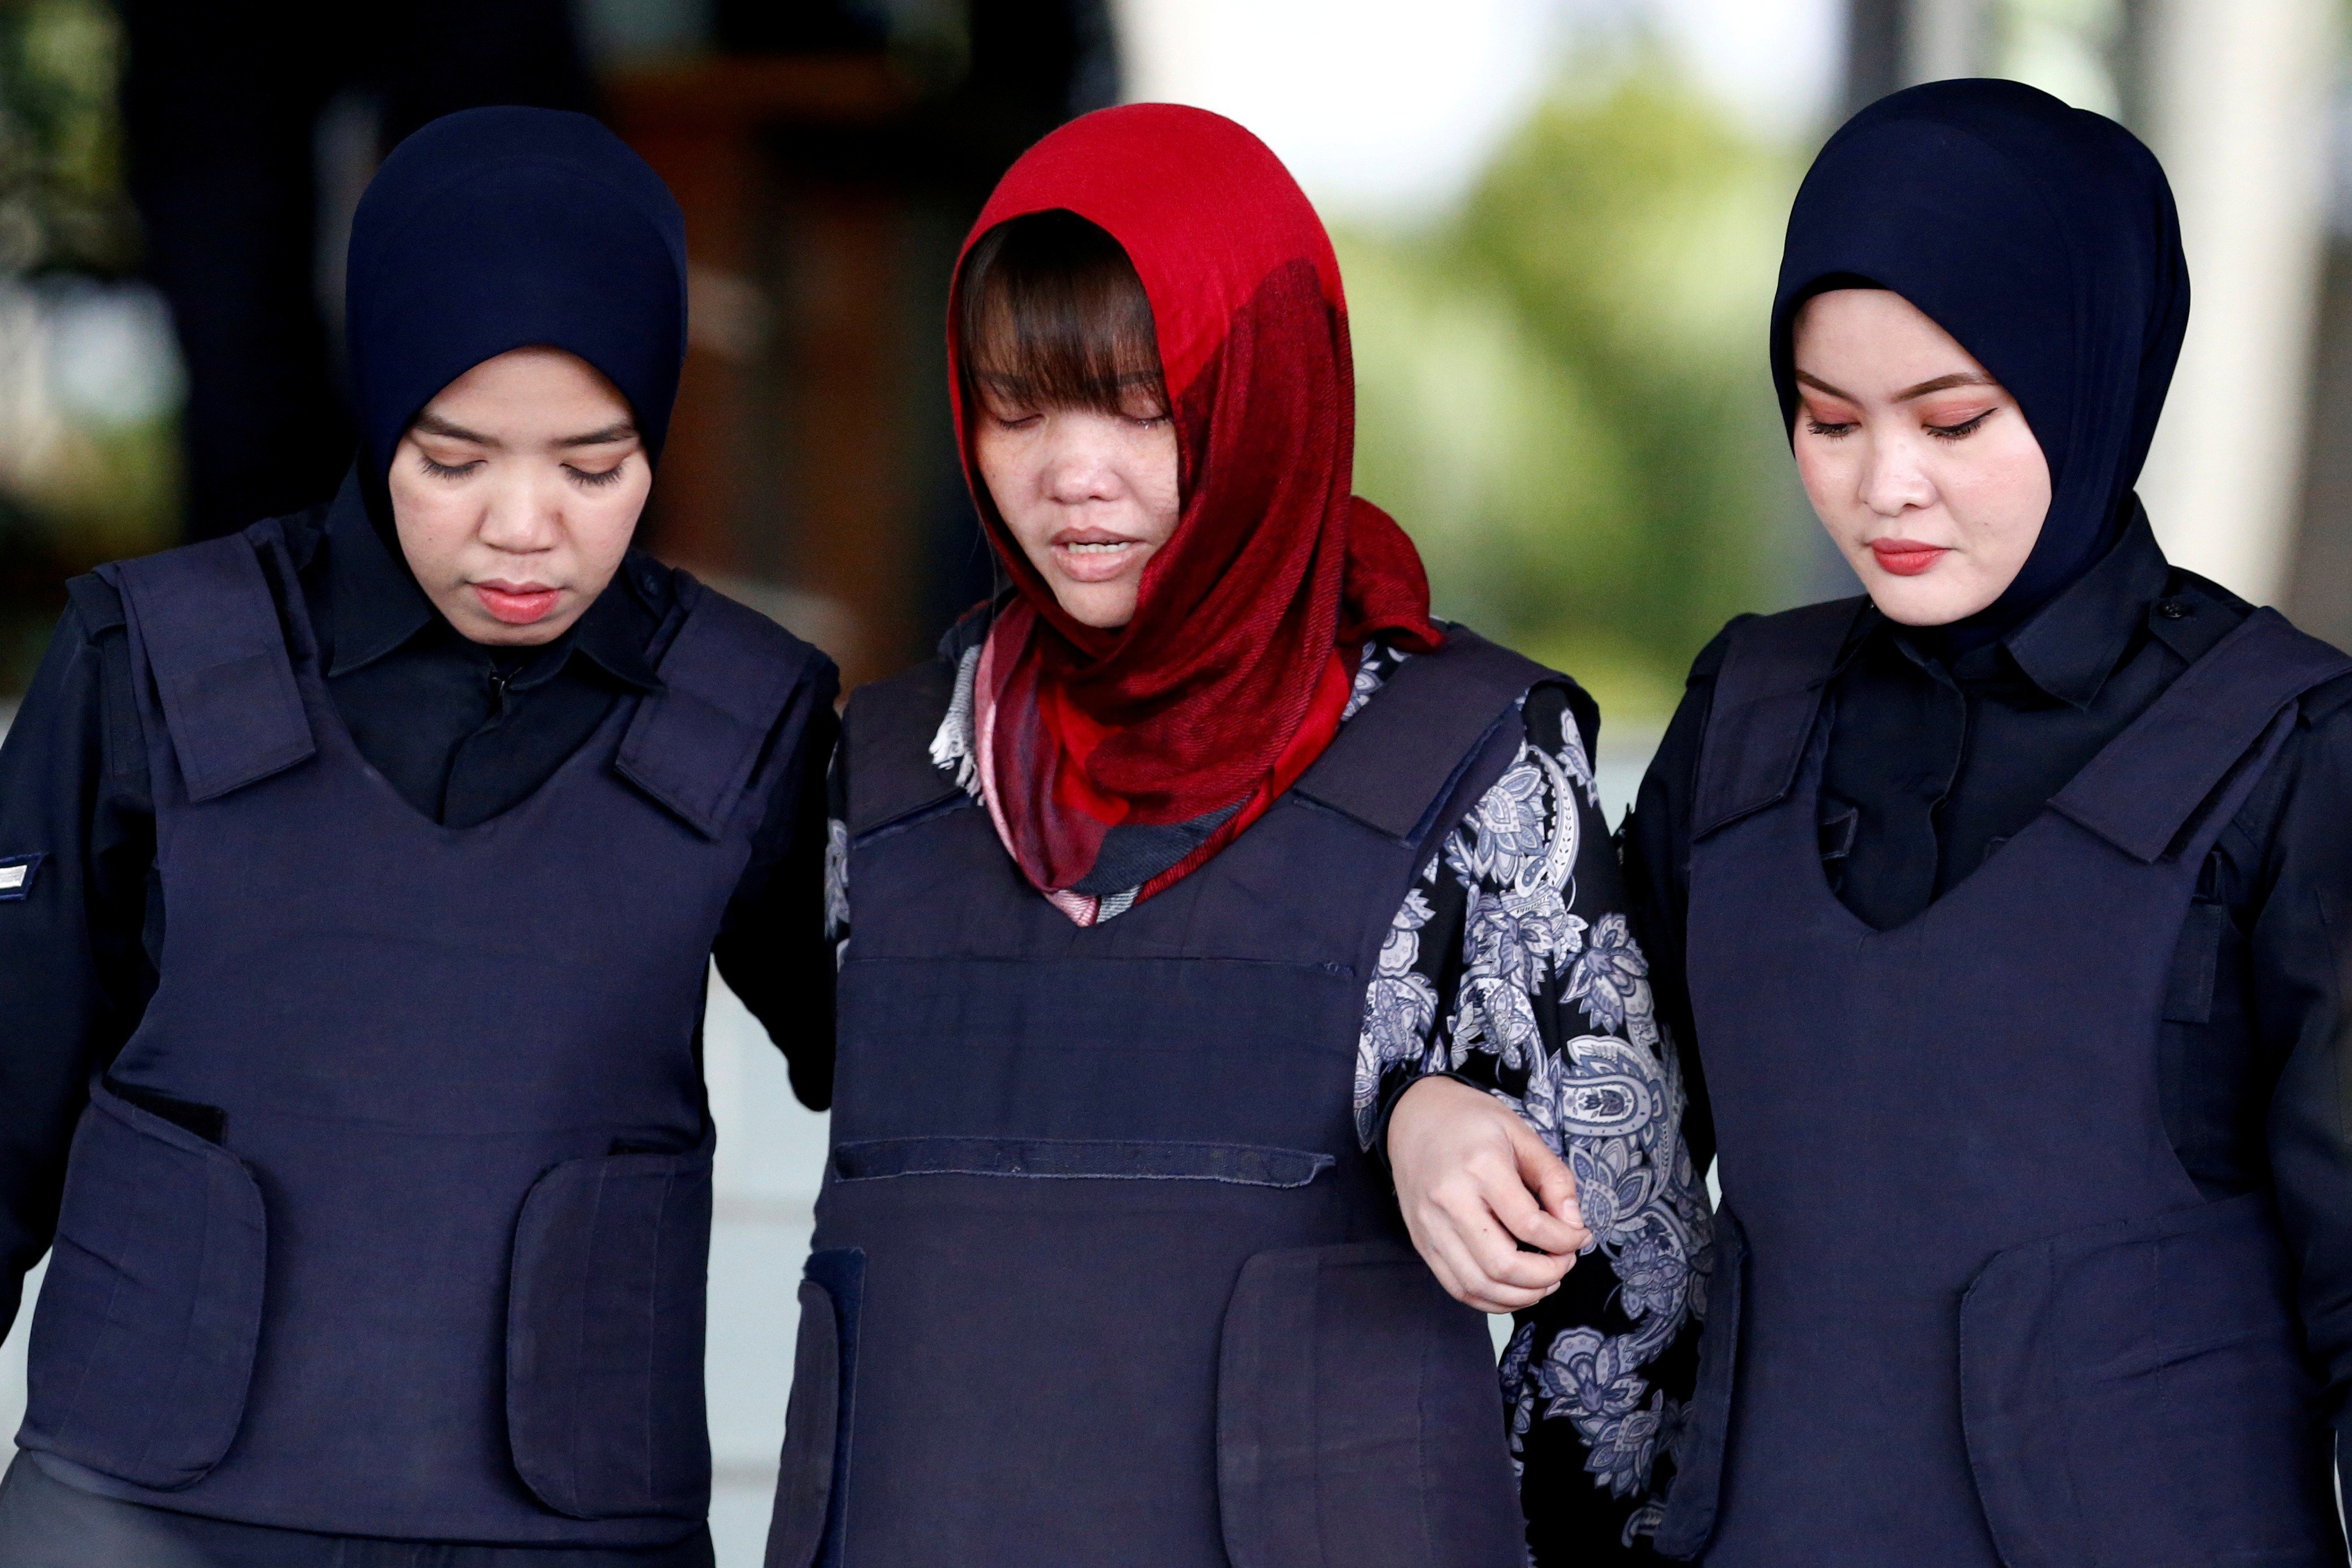 Doan Thi Huong, who was a suspect in the murder of Kim Jong-nam. Photo: Reuters